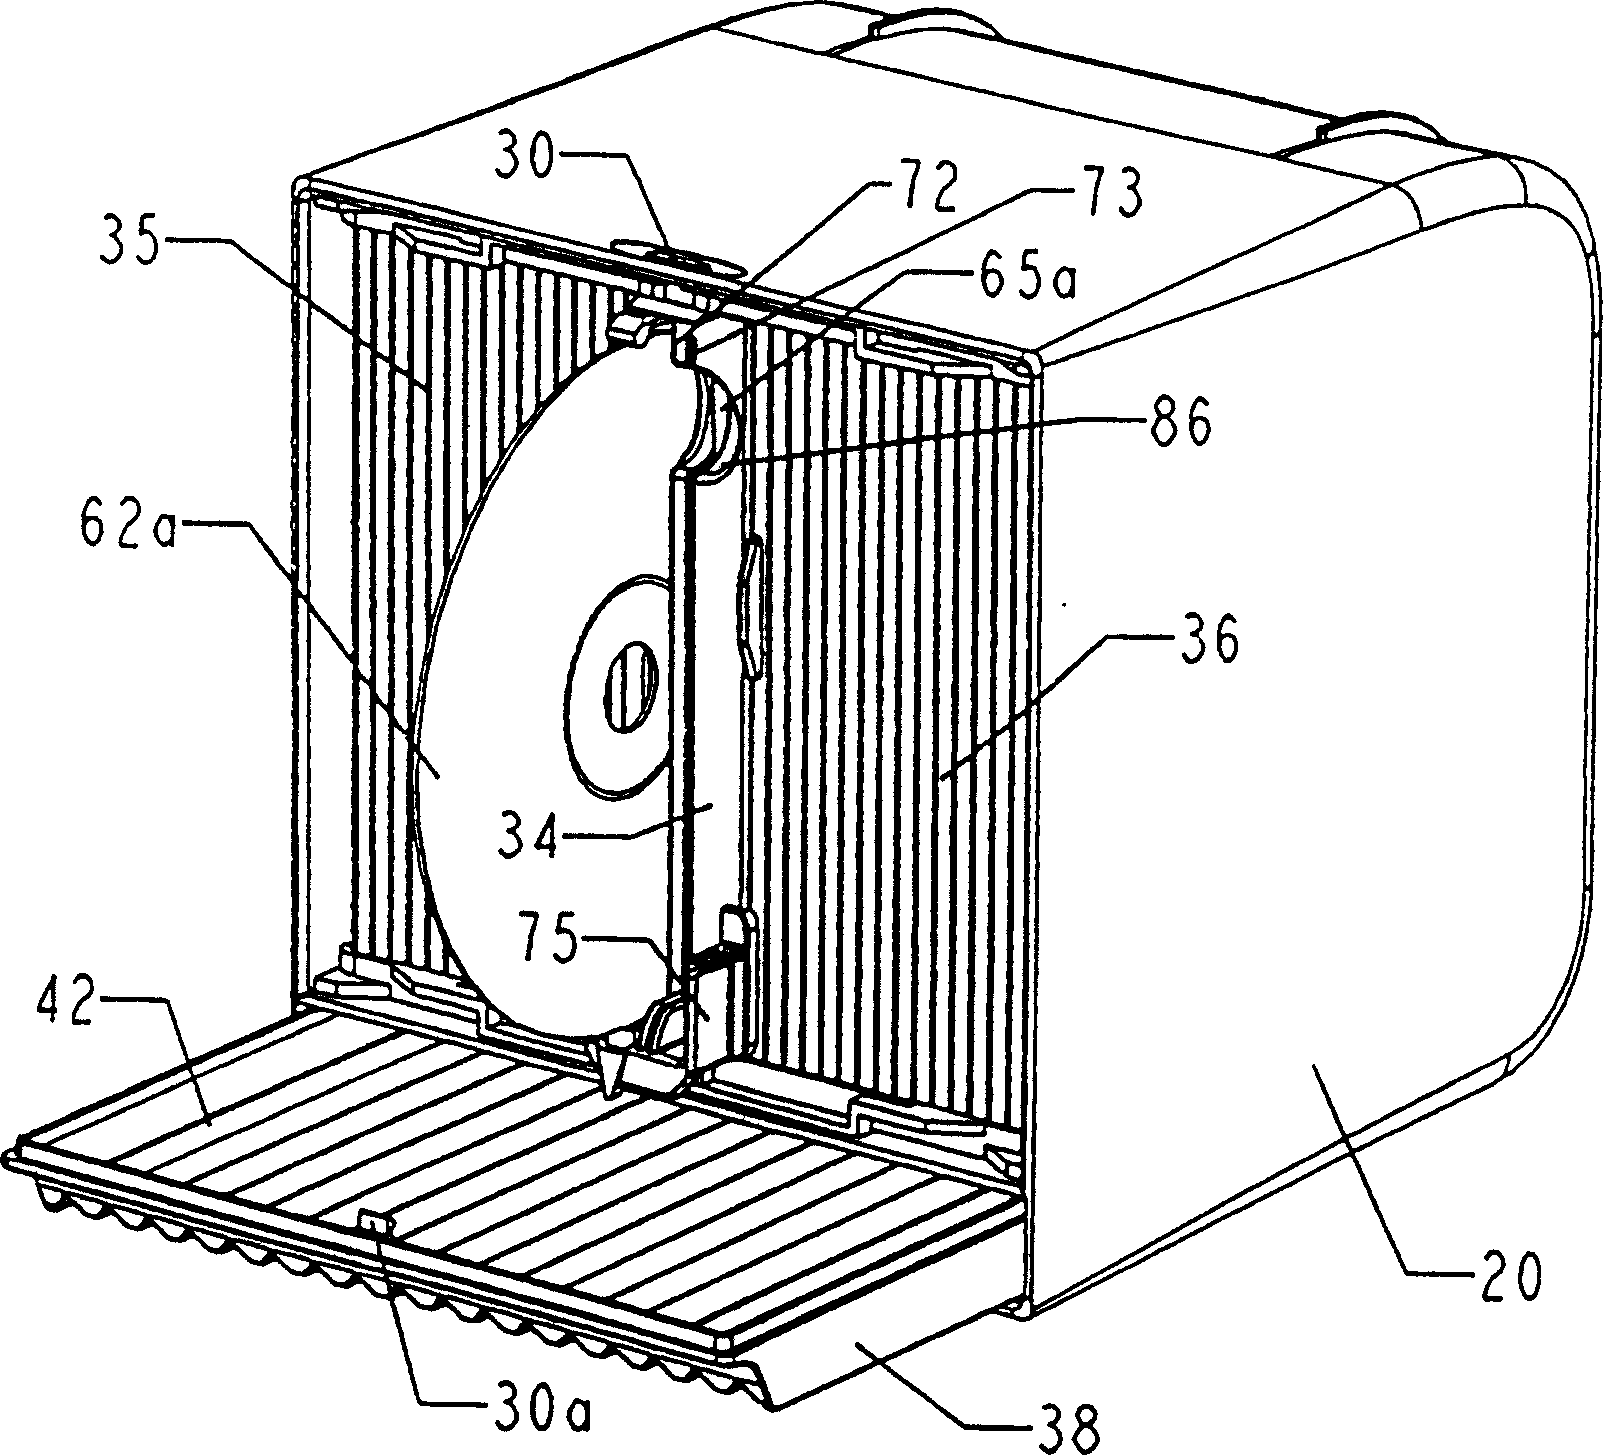 Dispensing and storage unit for disc and like